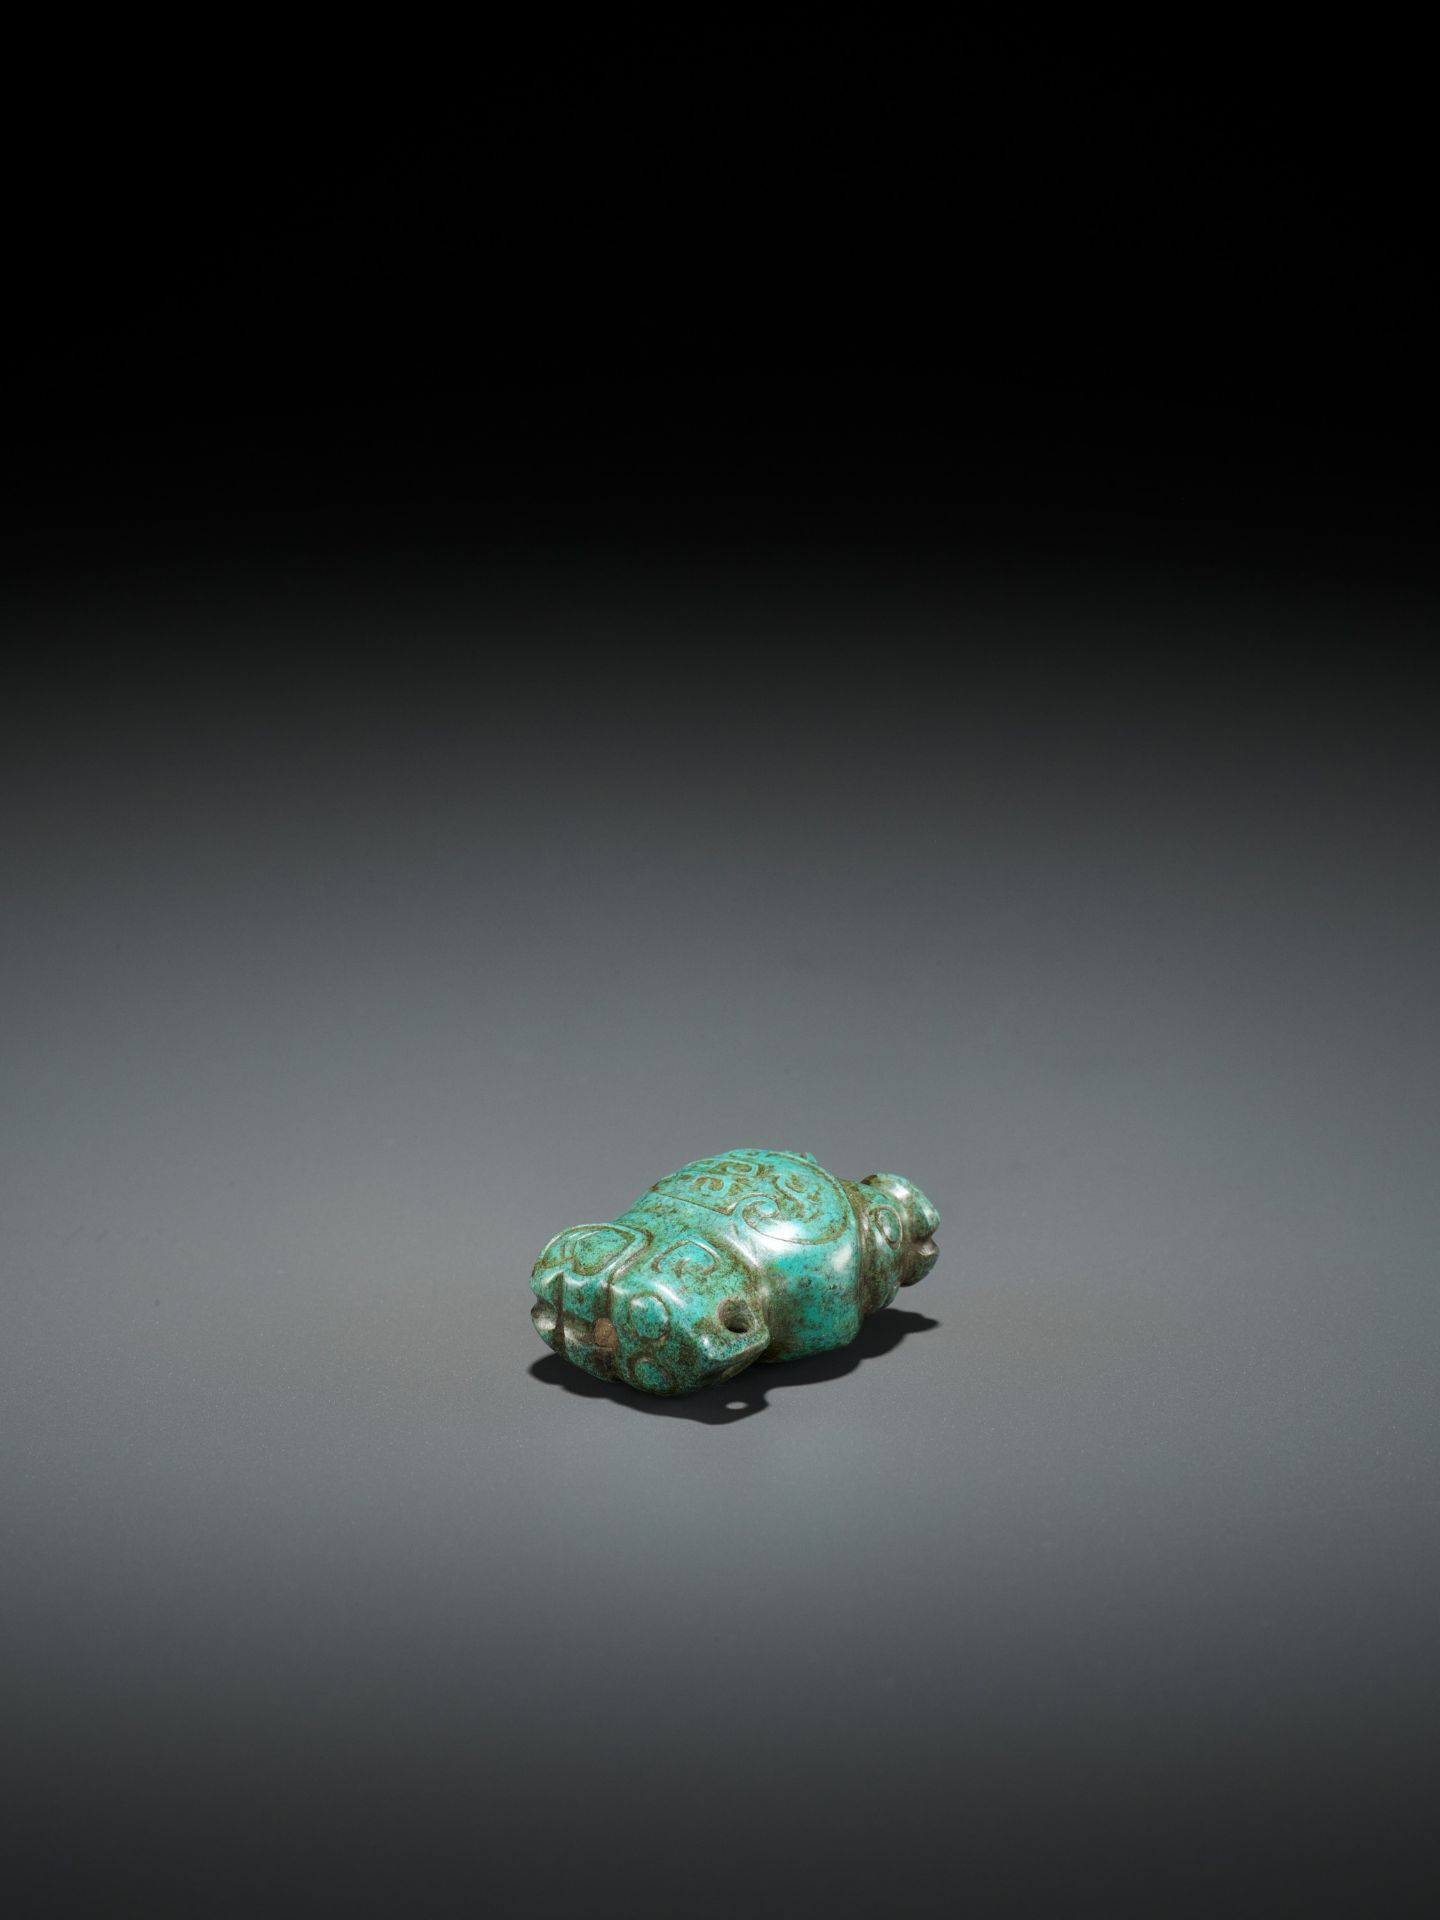 A TURQUOISE MATRIX PENDANT DEPICTING AN OWL, LATE SHANG DYNASTY - Image 11 of 13